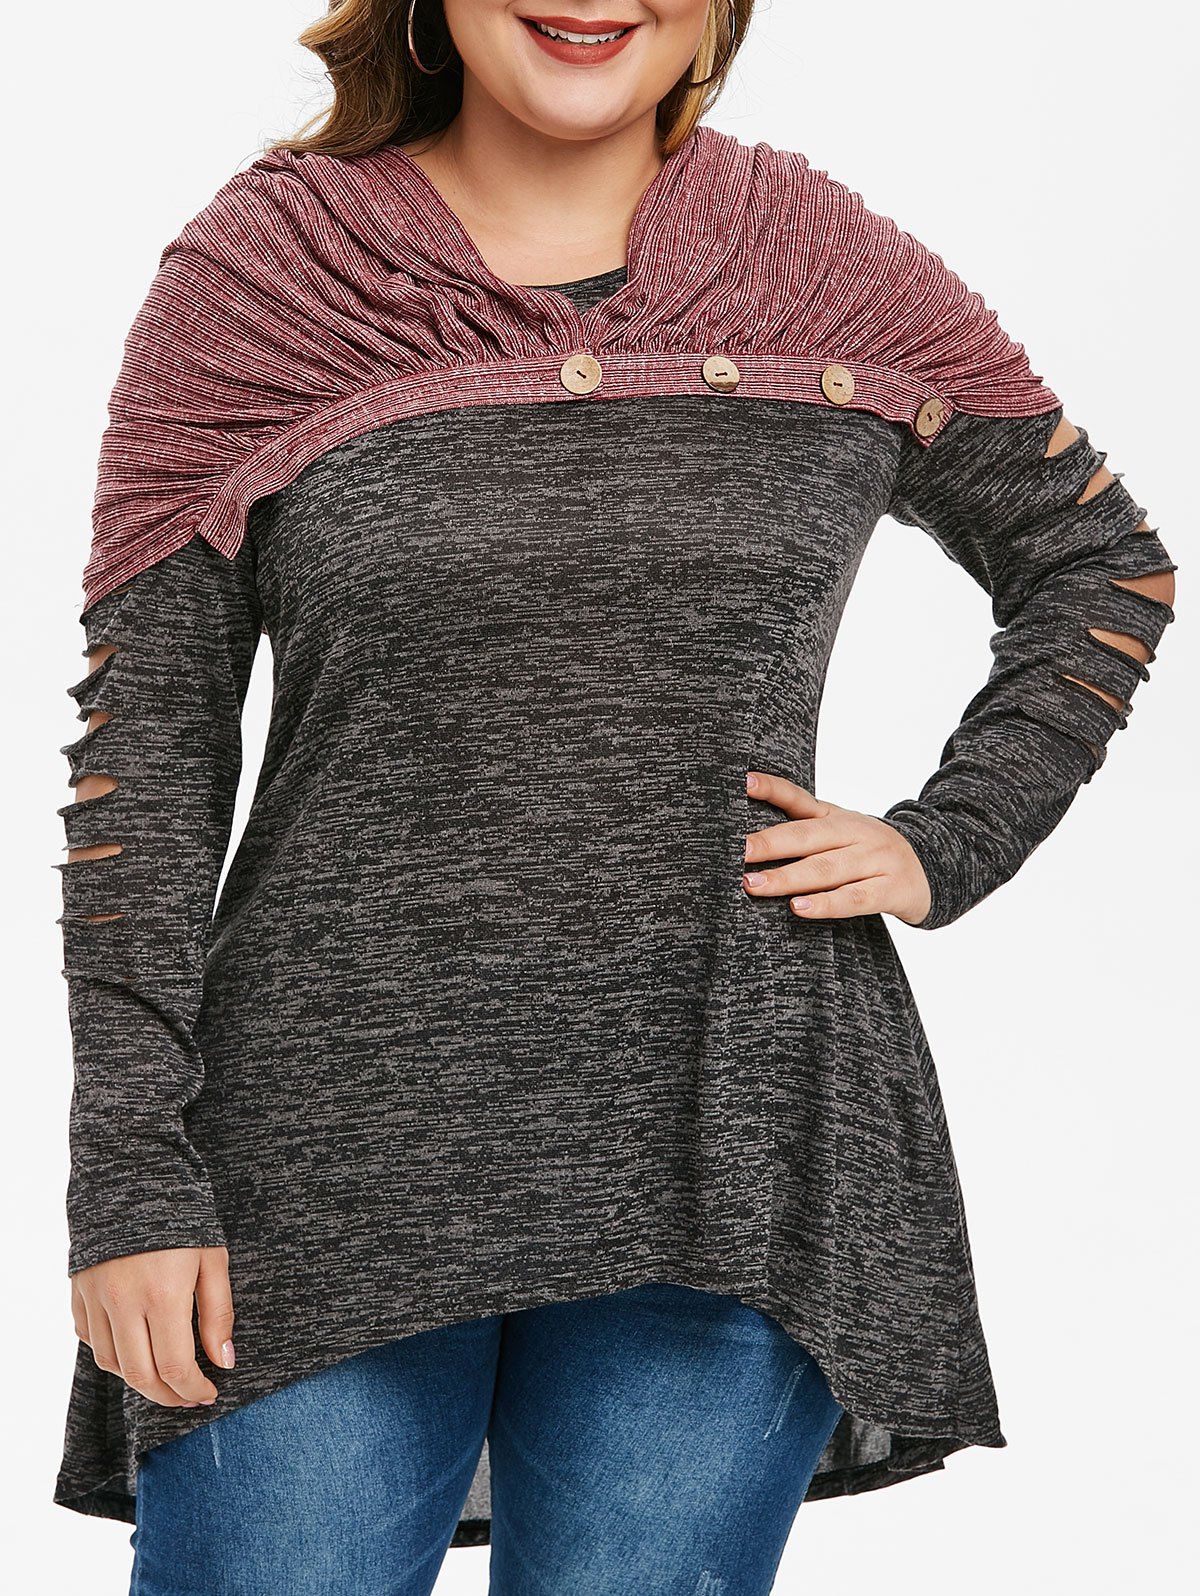 

Plus Size Ladder Cut Ripped Marled T Shirt With Button Scarf, Dark gray